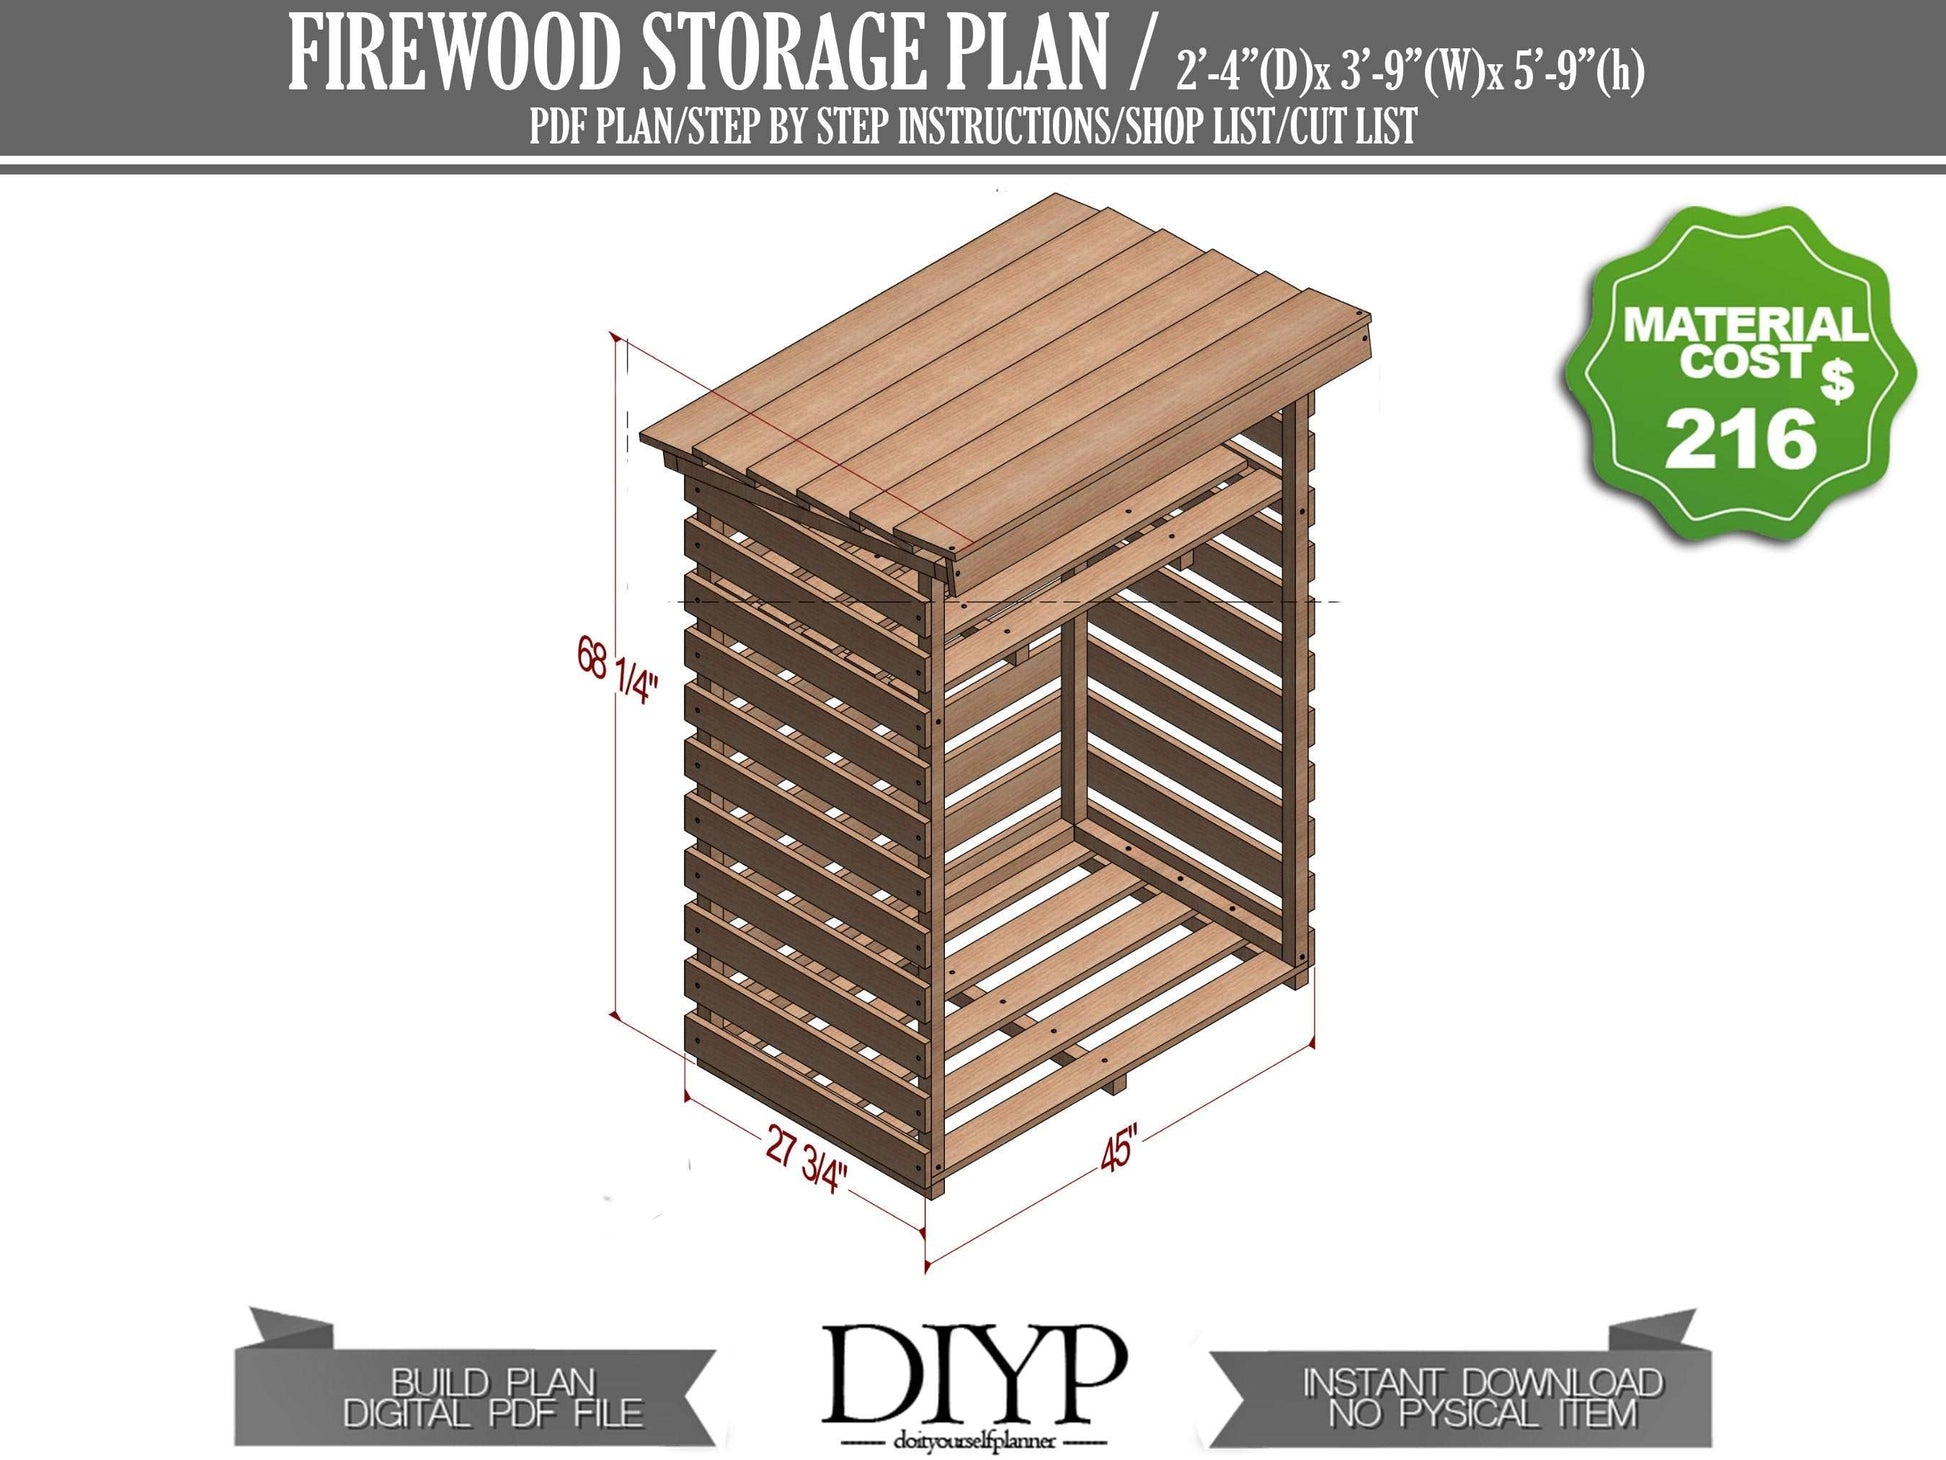 Useful Firewood Storage Shed Plans- DIY plans for wooden shelter with storage space